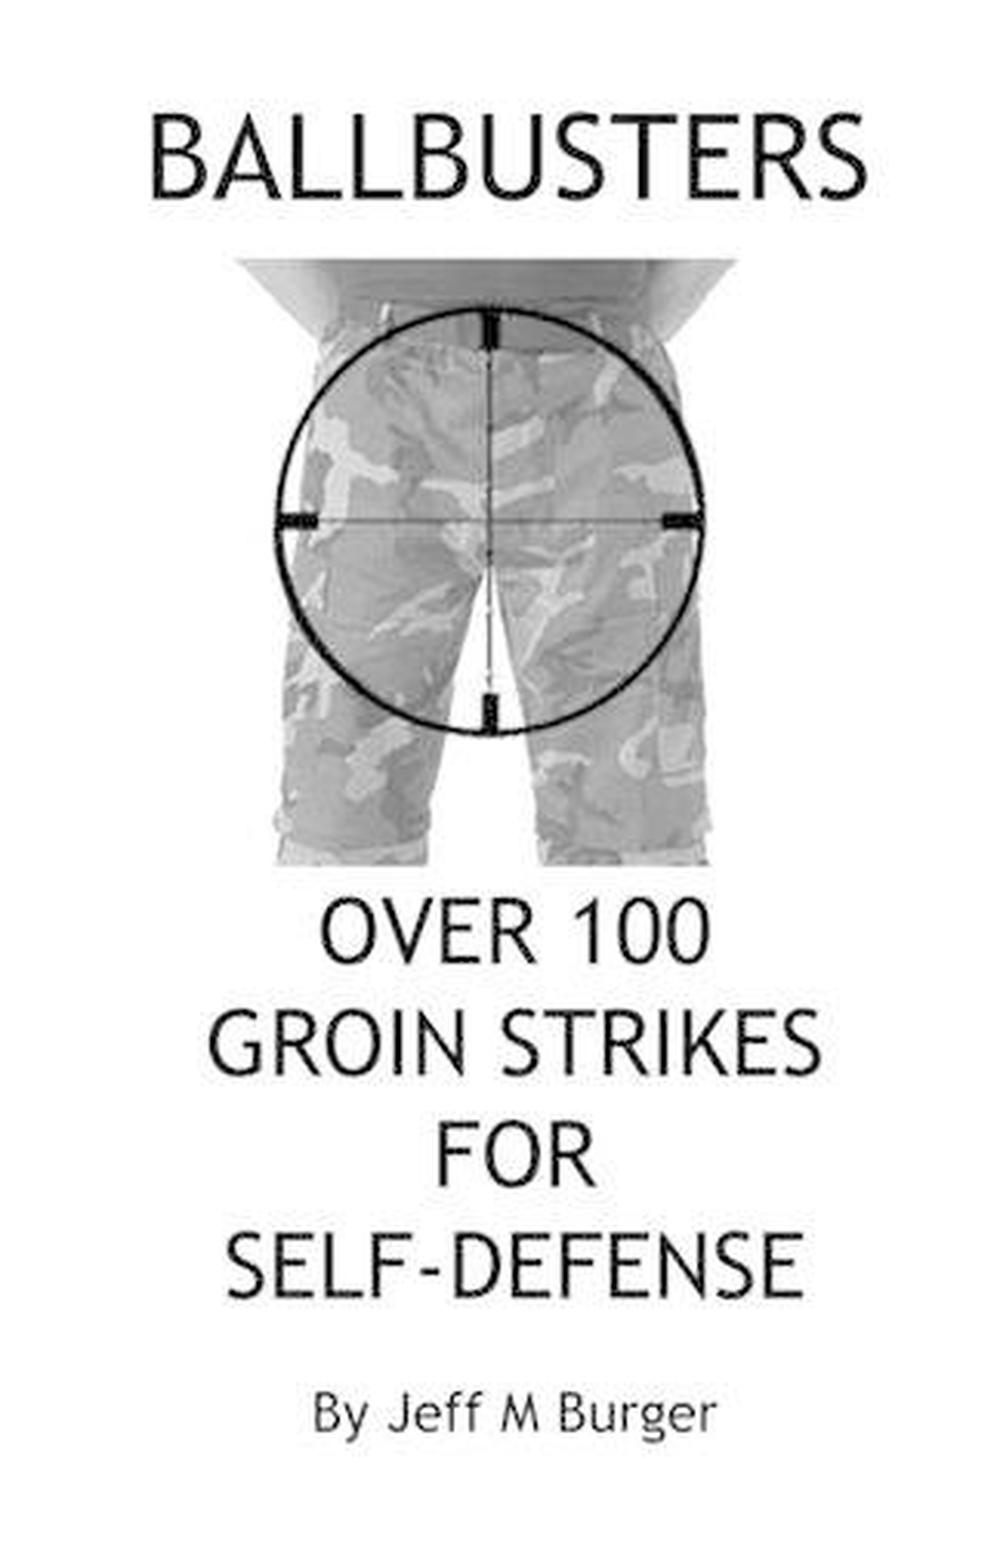 Ballbusters Over 100 Groin Strikes For Self Defense By Jeff M Burger 